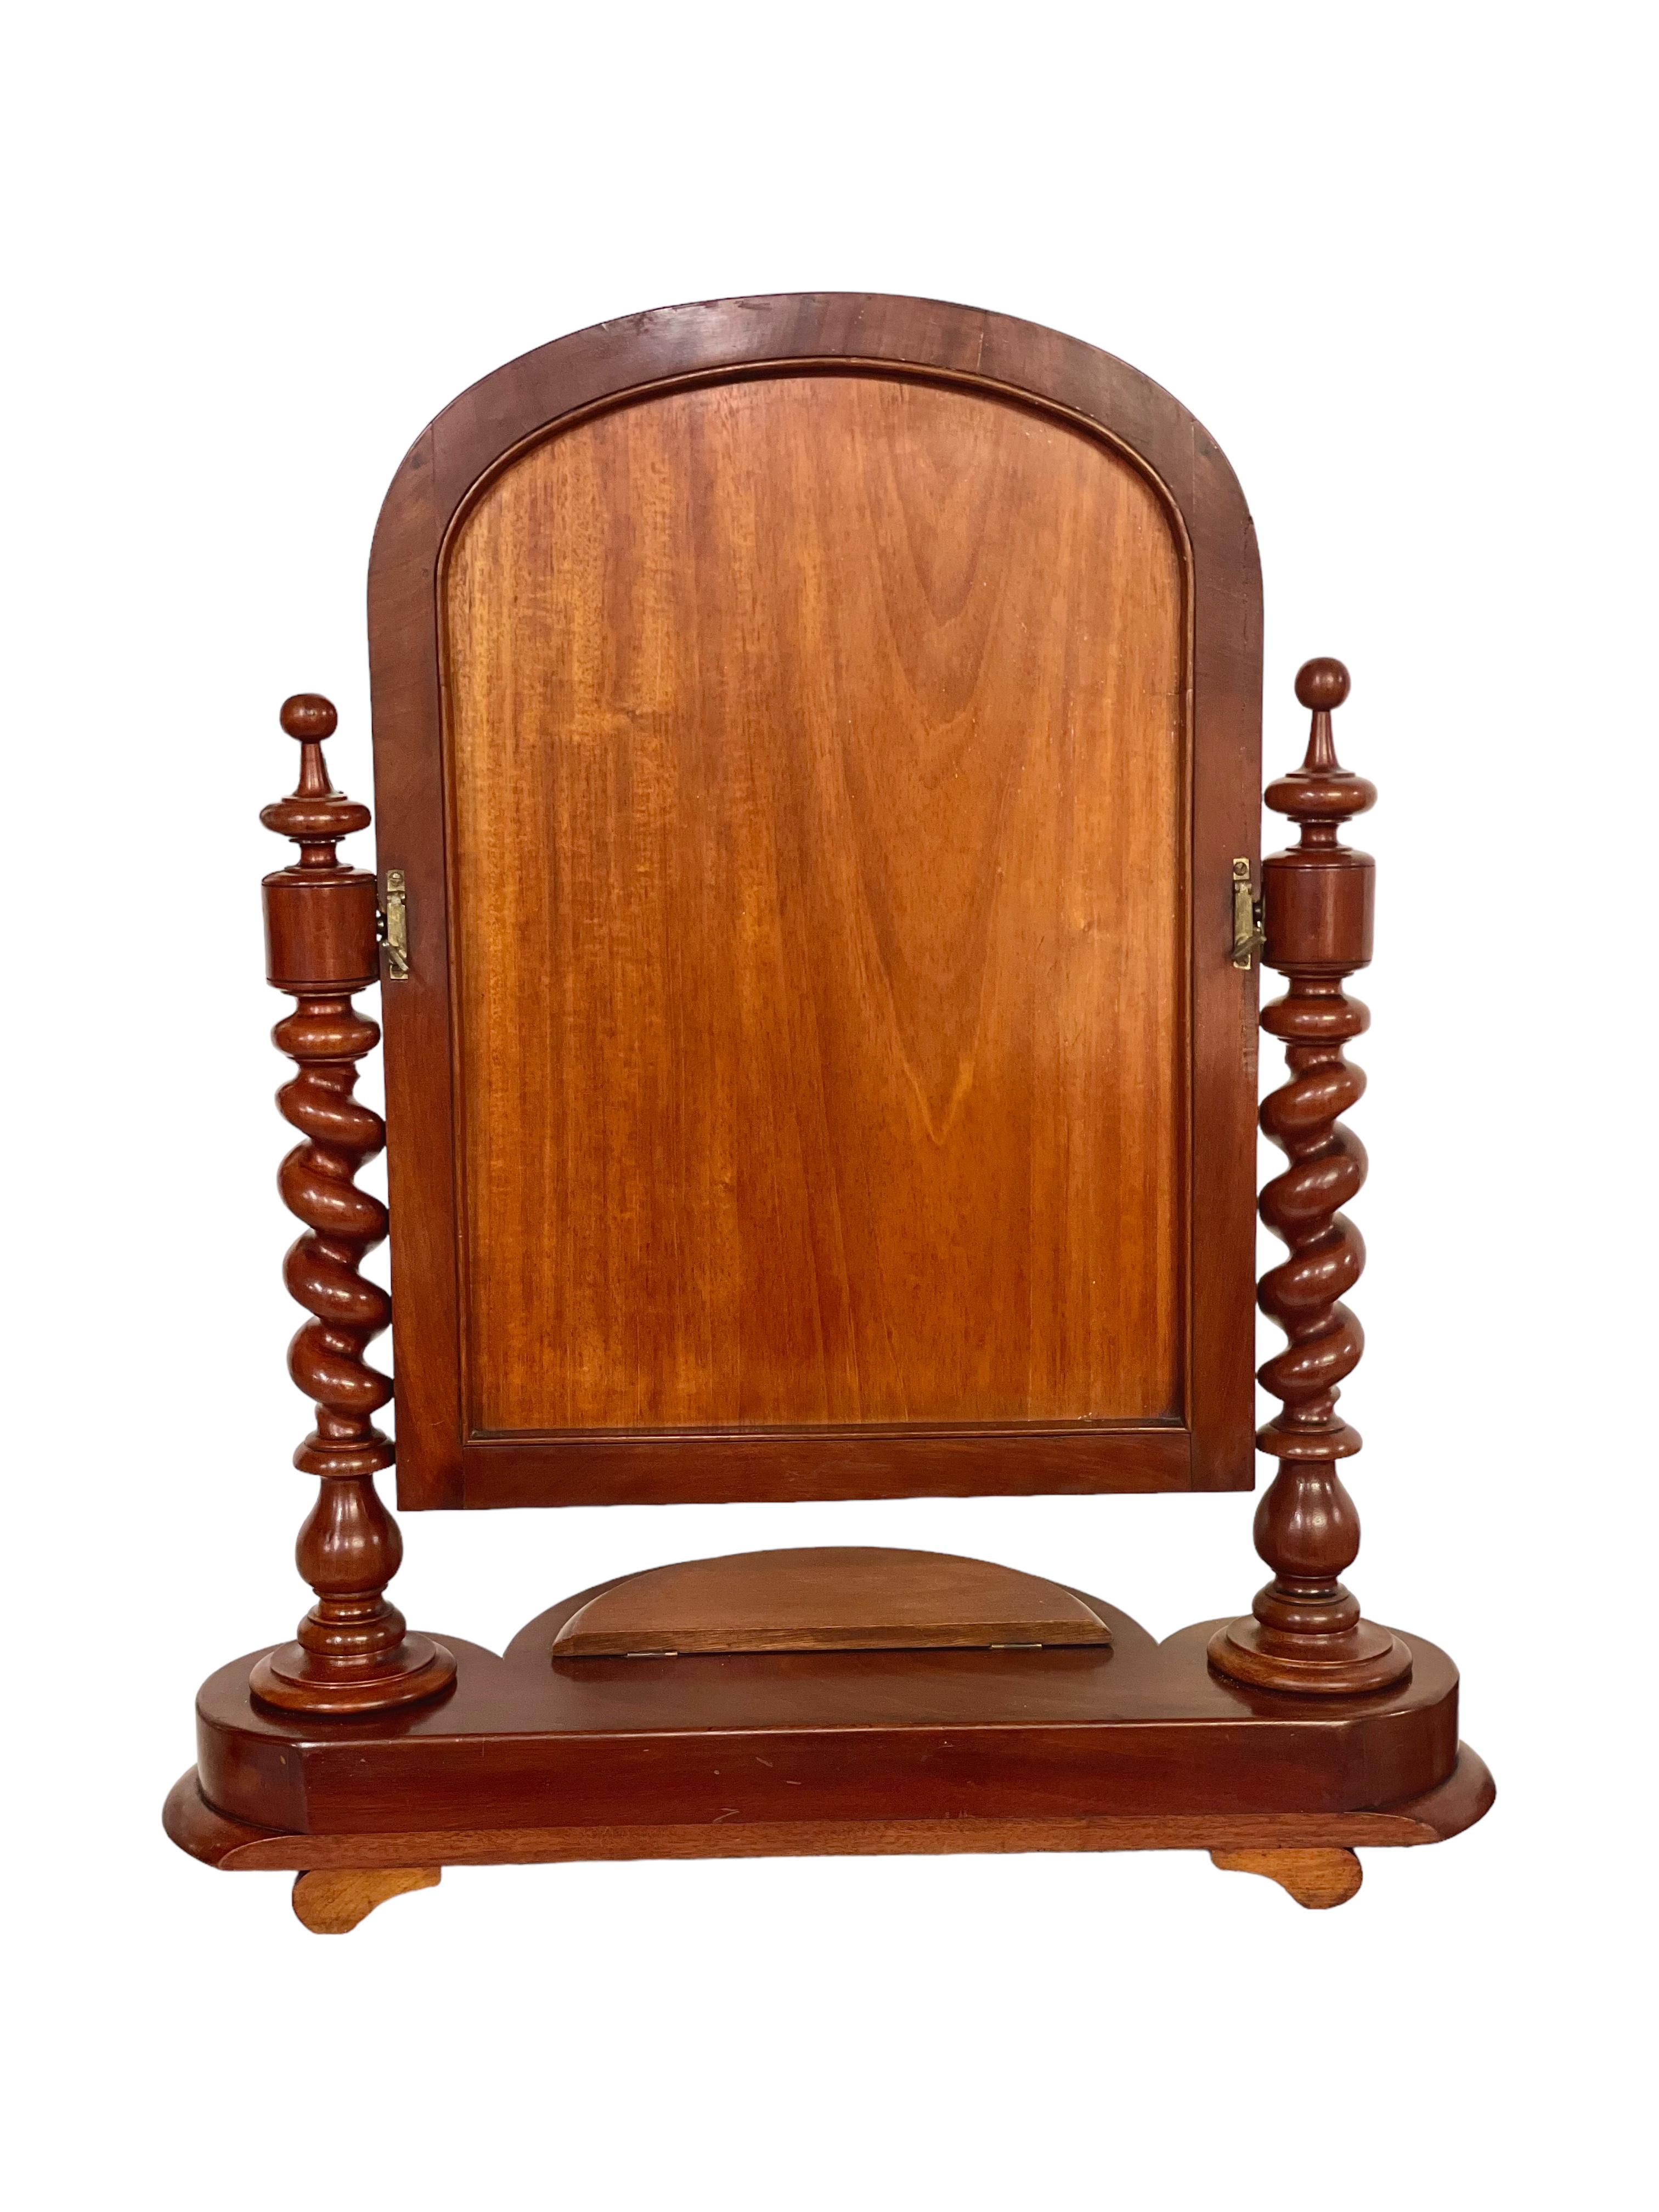 19th Century French Gentleman's Vanity or Table Mirror For Sale 2